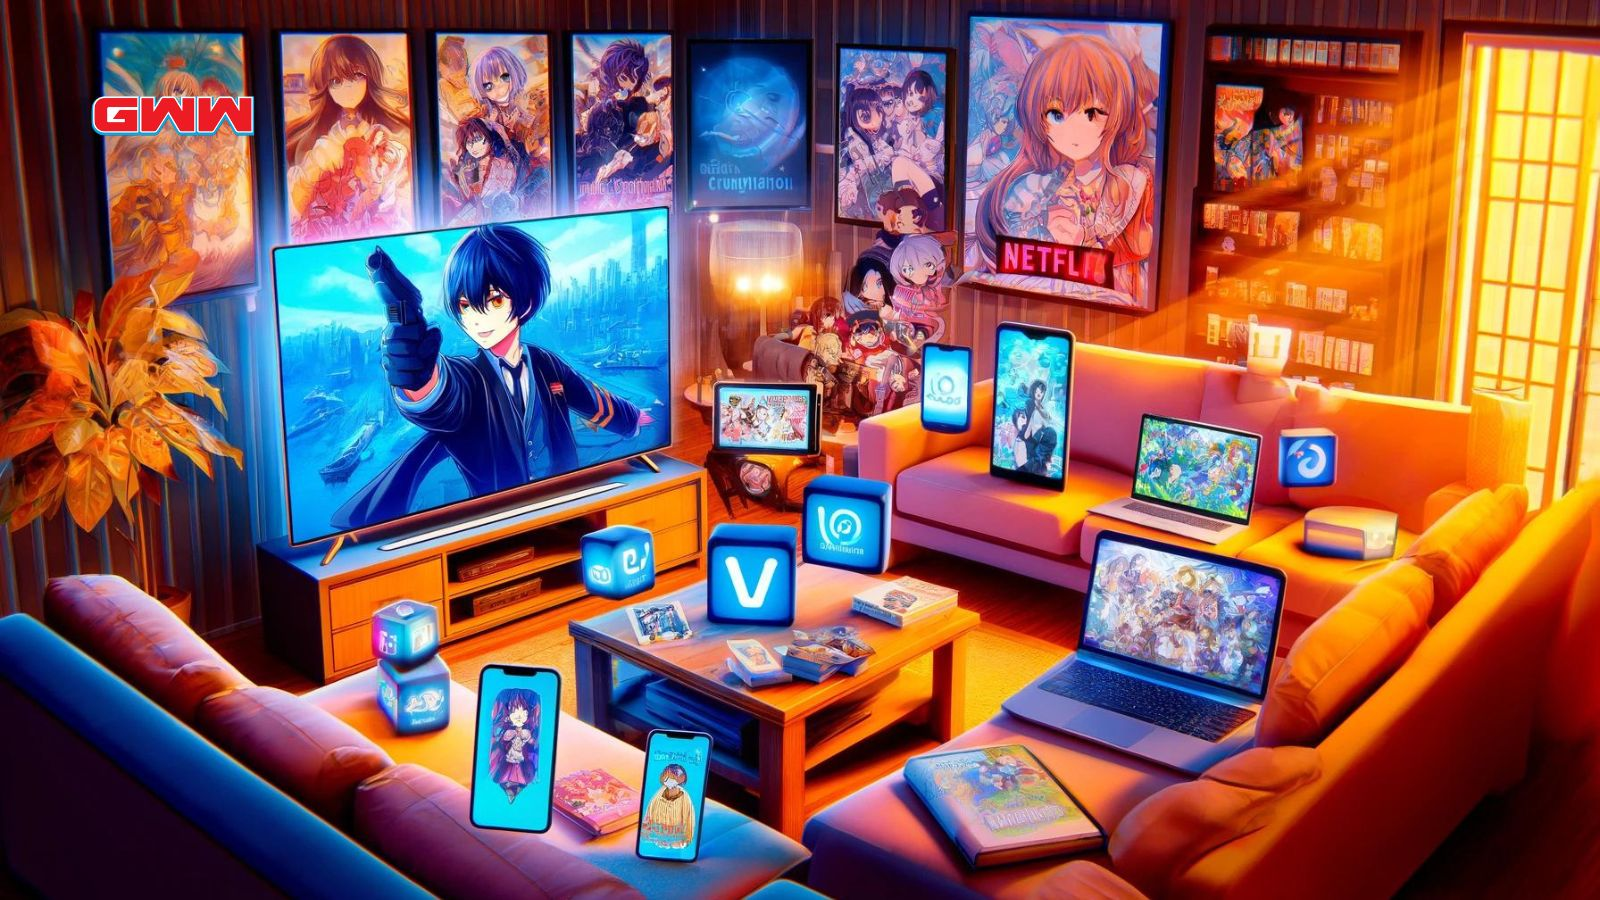 A dynamic and vibrant scene showing various platforms where dubbed anime can be watched in English